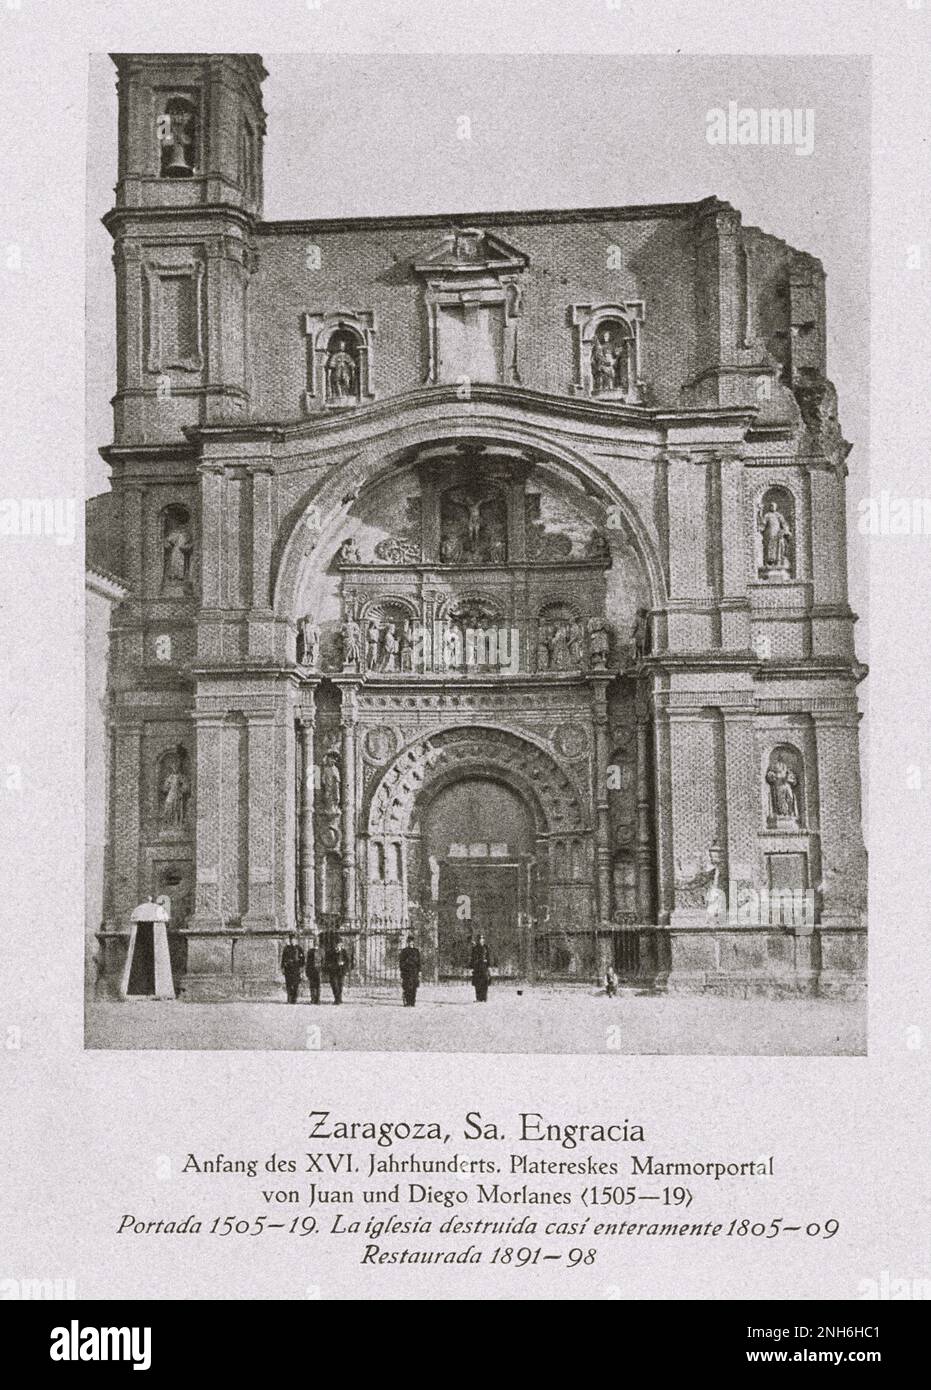 Architecture of Old Spain. Vintage photo of Church of Santa Engracia de Zaragoza. Early 16th century. The Church of Santa Engracia de Zaragoza is a basilica church in Zaragoza, Spain. It was built on the spot where Saint Engratia and her companions were said to have been martyred in 303 AD. The Basilica of Santa Engracia is located at Plaza de Santa Engracia. Stock Photo